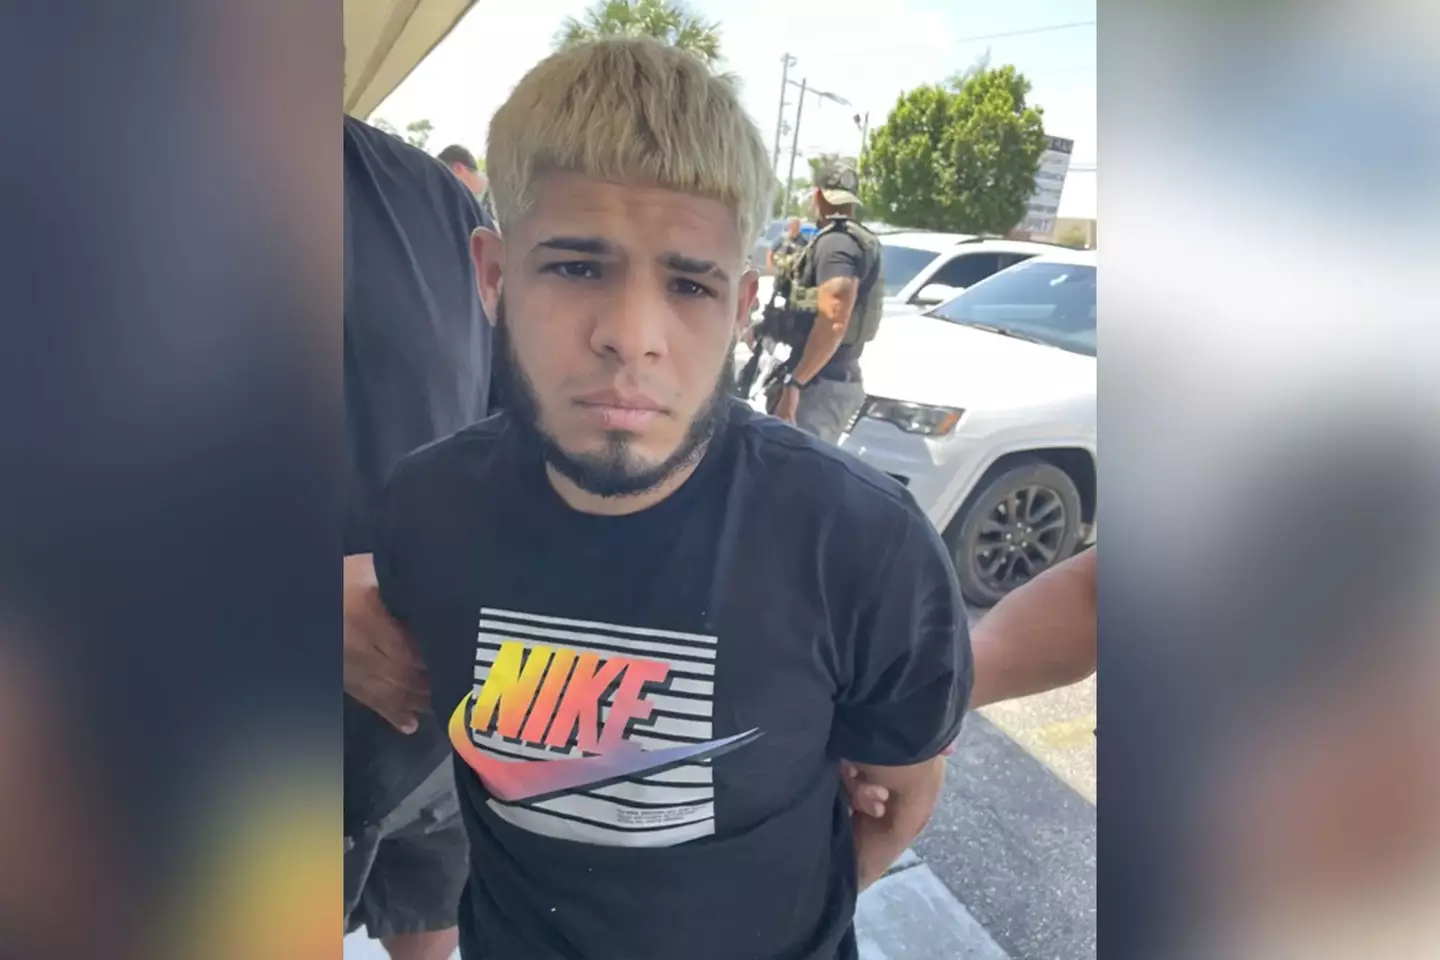 Jordanish Torres-Garcia claims he received his gun a half hour before the abduction. (Seminole County Sheriff's Office/Facebook)